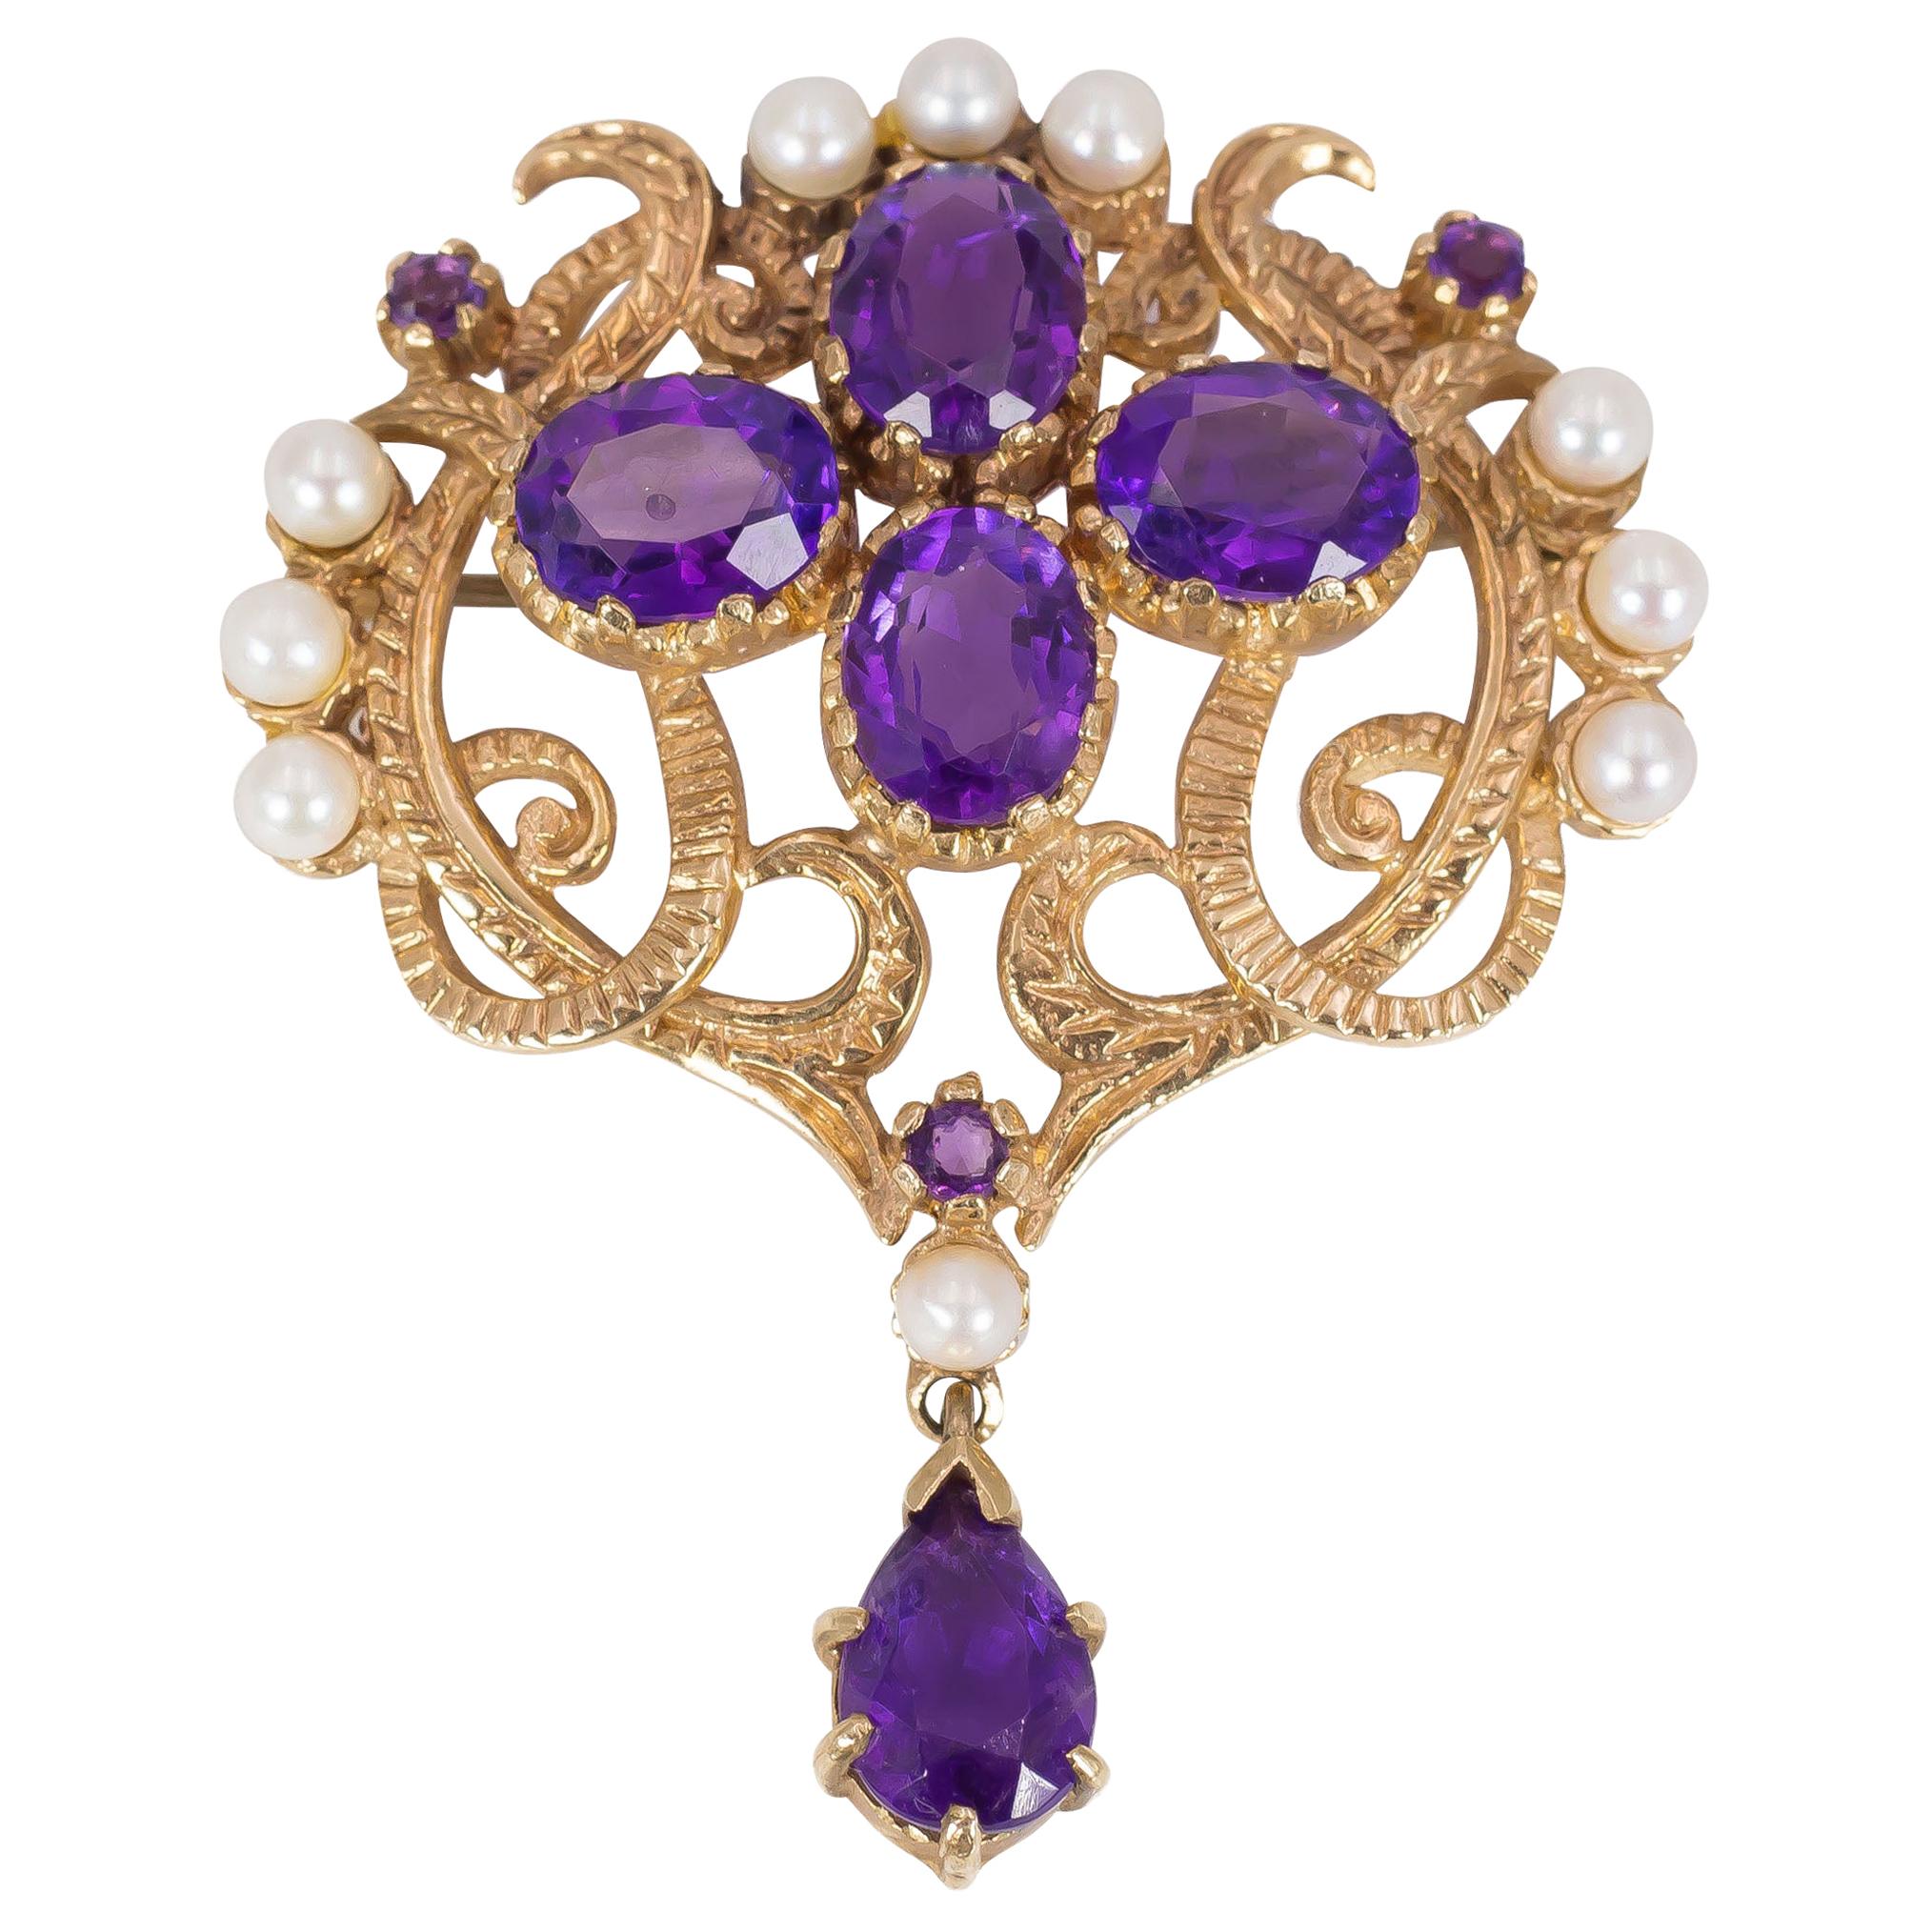 Antique 9 Karat Gold, Amethyst and Bead Brooch, Early 1900 For Sale